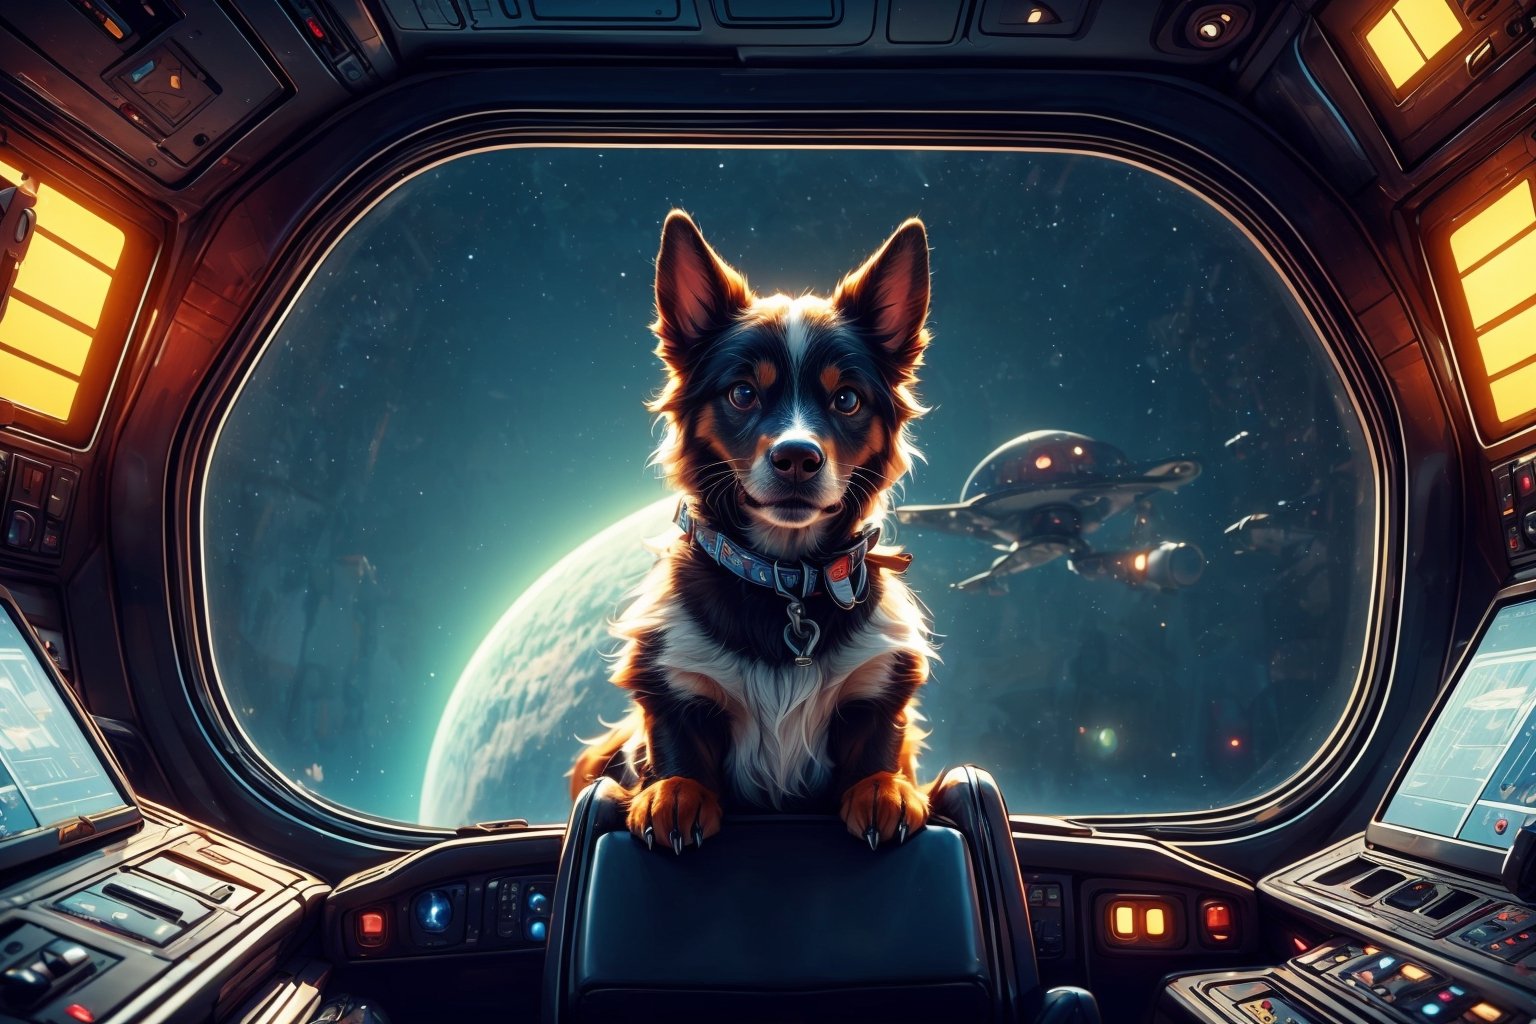 (((face, focus on the face)))

realistic, masterpiece, best quality, cute dog in astronaut suite, ultra high definition, masterpiece, best quality, astroverse, spaceship, nasa, interior of a spaceship, astronaut, astronaut dog, cosmo, space, 3d